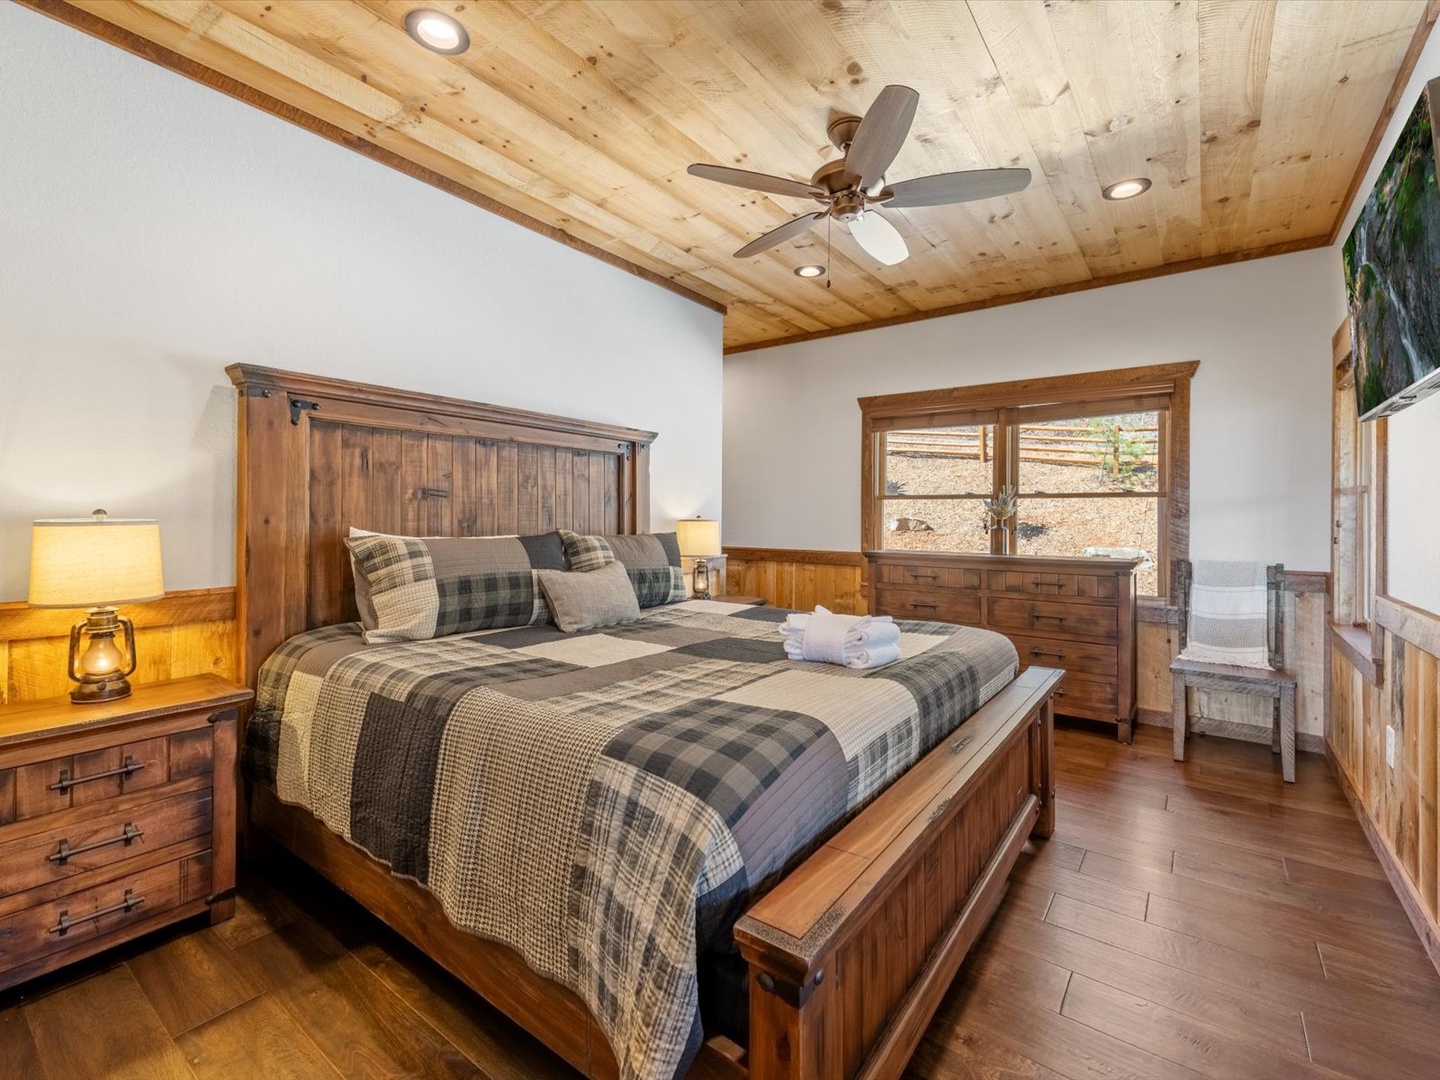 Tranquil Escape of Blue Ridge - Entry Level Primary King Bedroom Suite